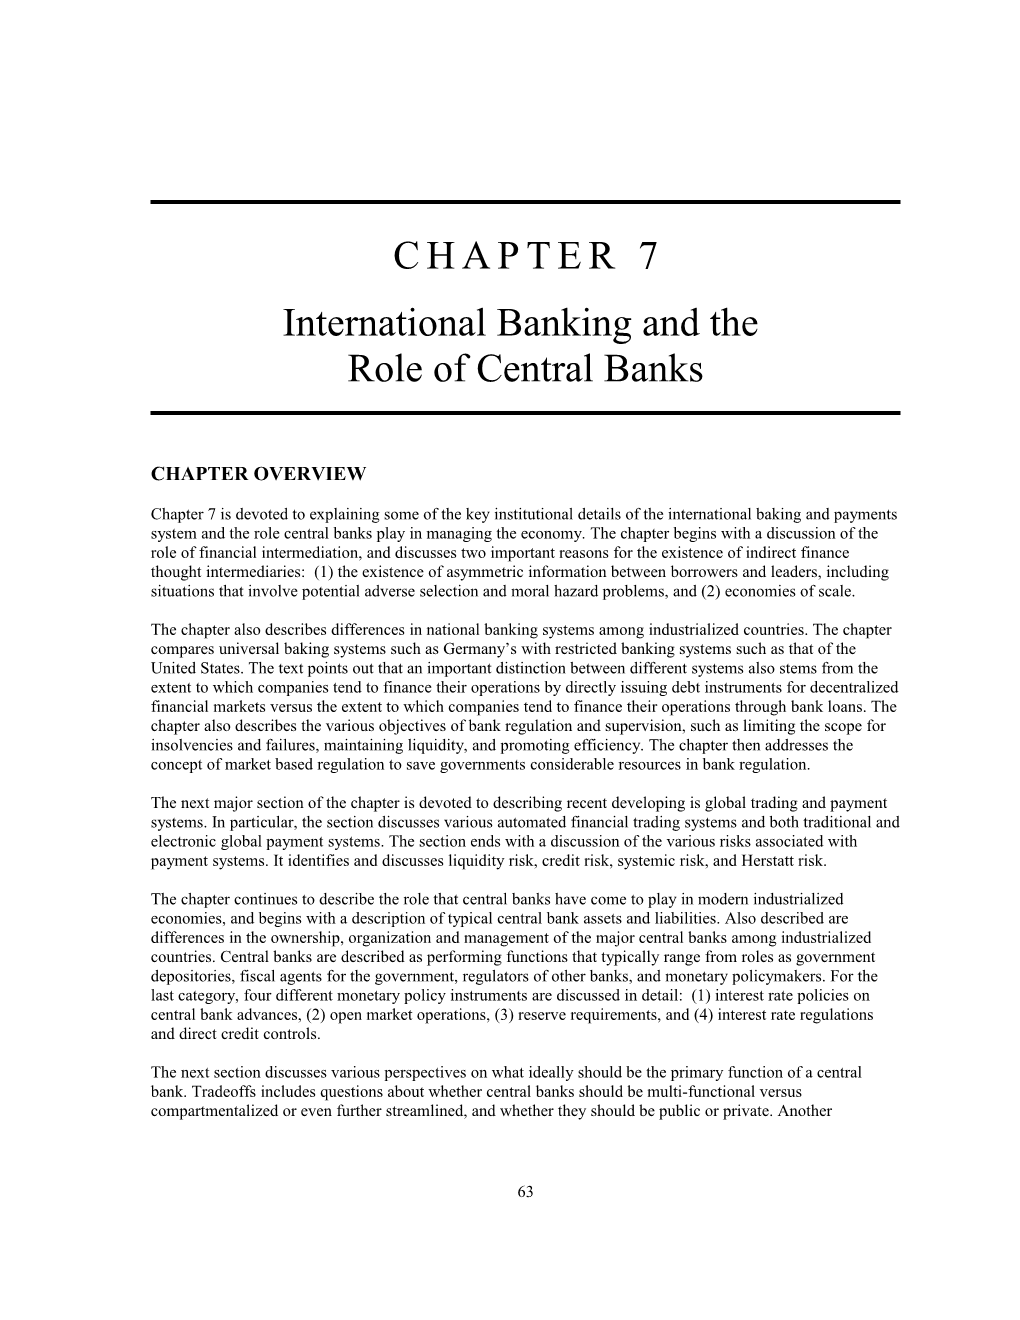 International Banking and The